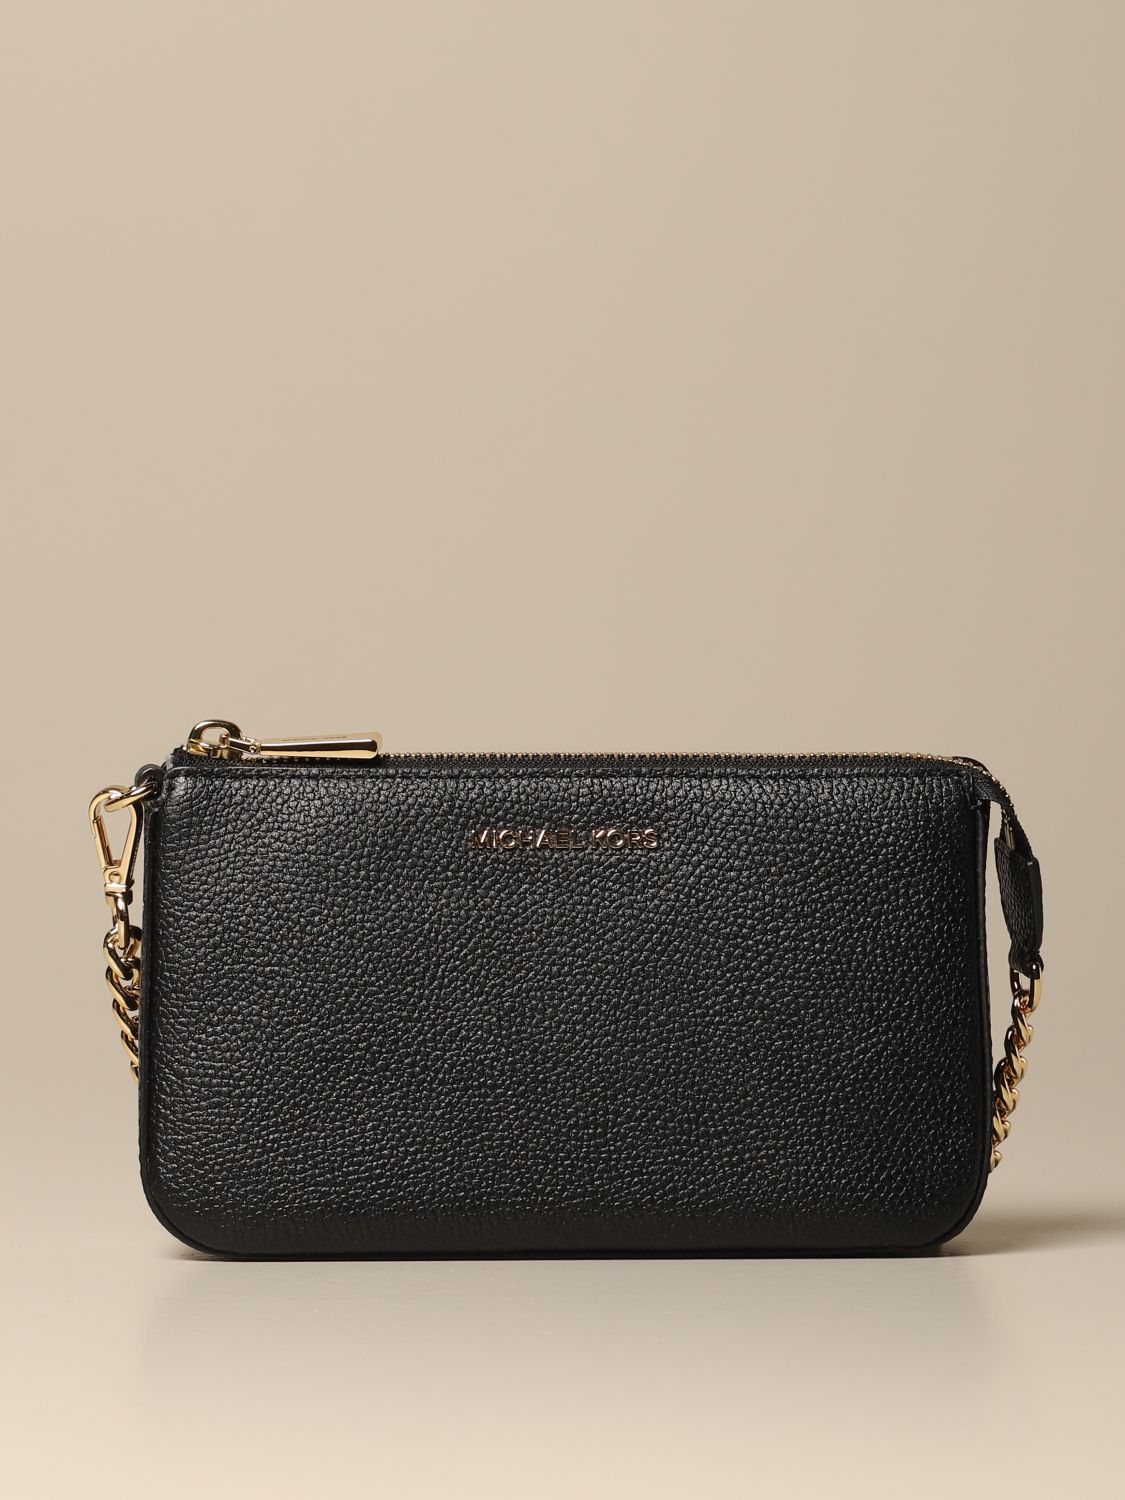 MICHAEL MICHAEL KORS: chain clutch in grained leather | Shoulder Bag